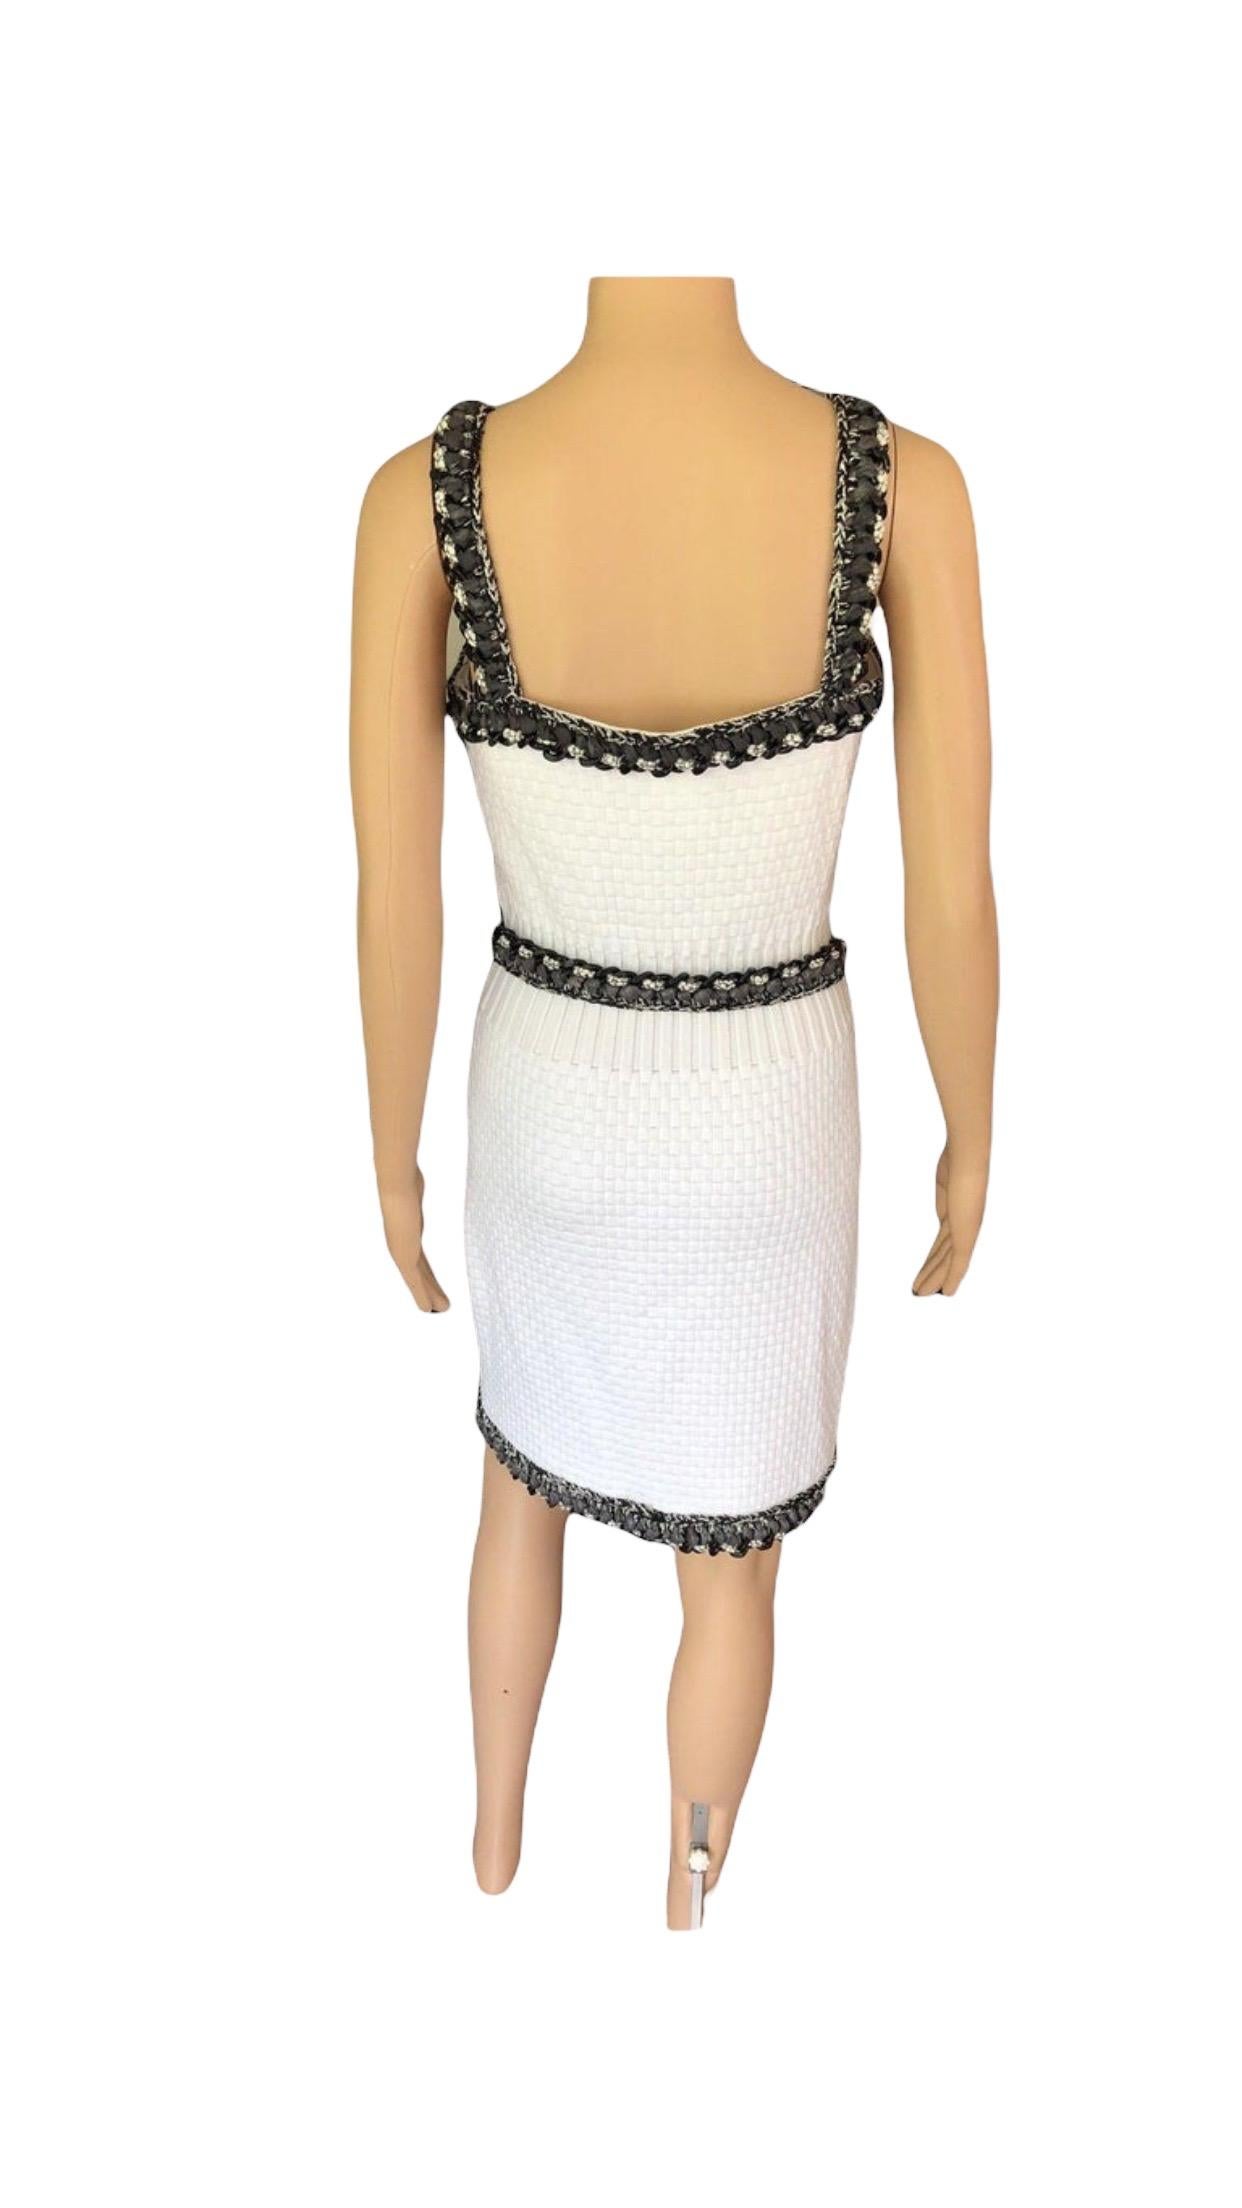 Women's New Chanel S/S 2014 Runway Knit Chain Embellished Trim White Mini Dress For Sale